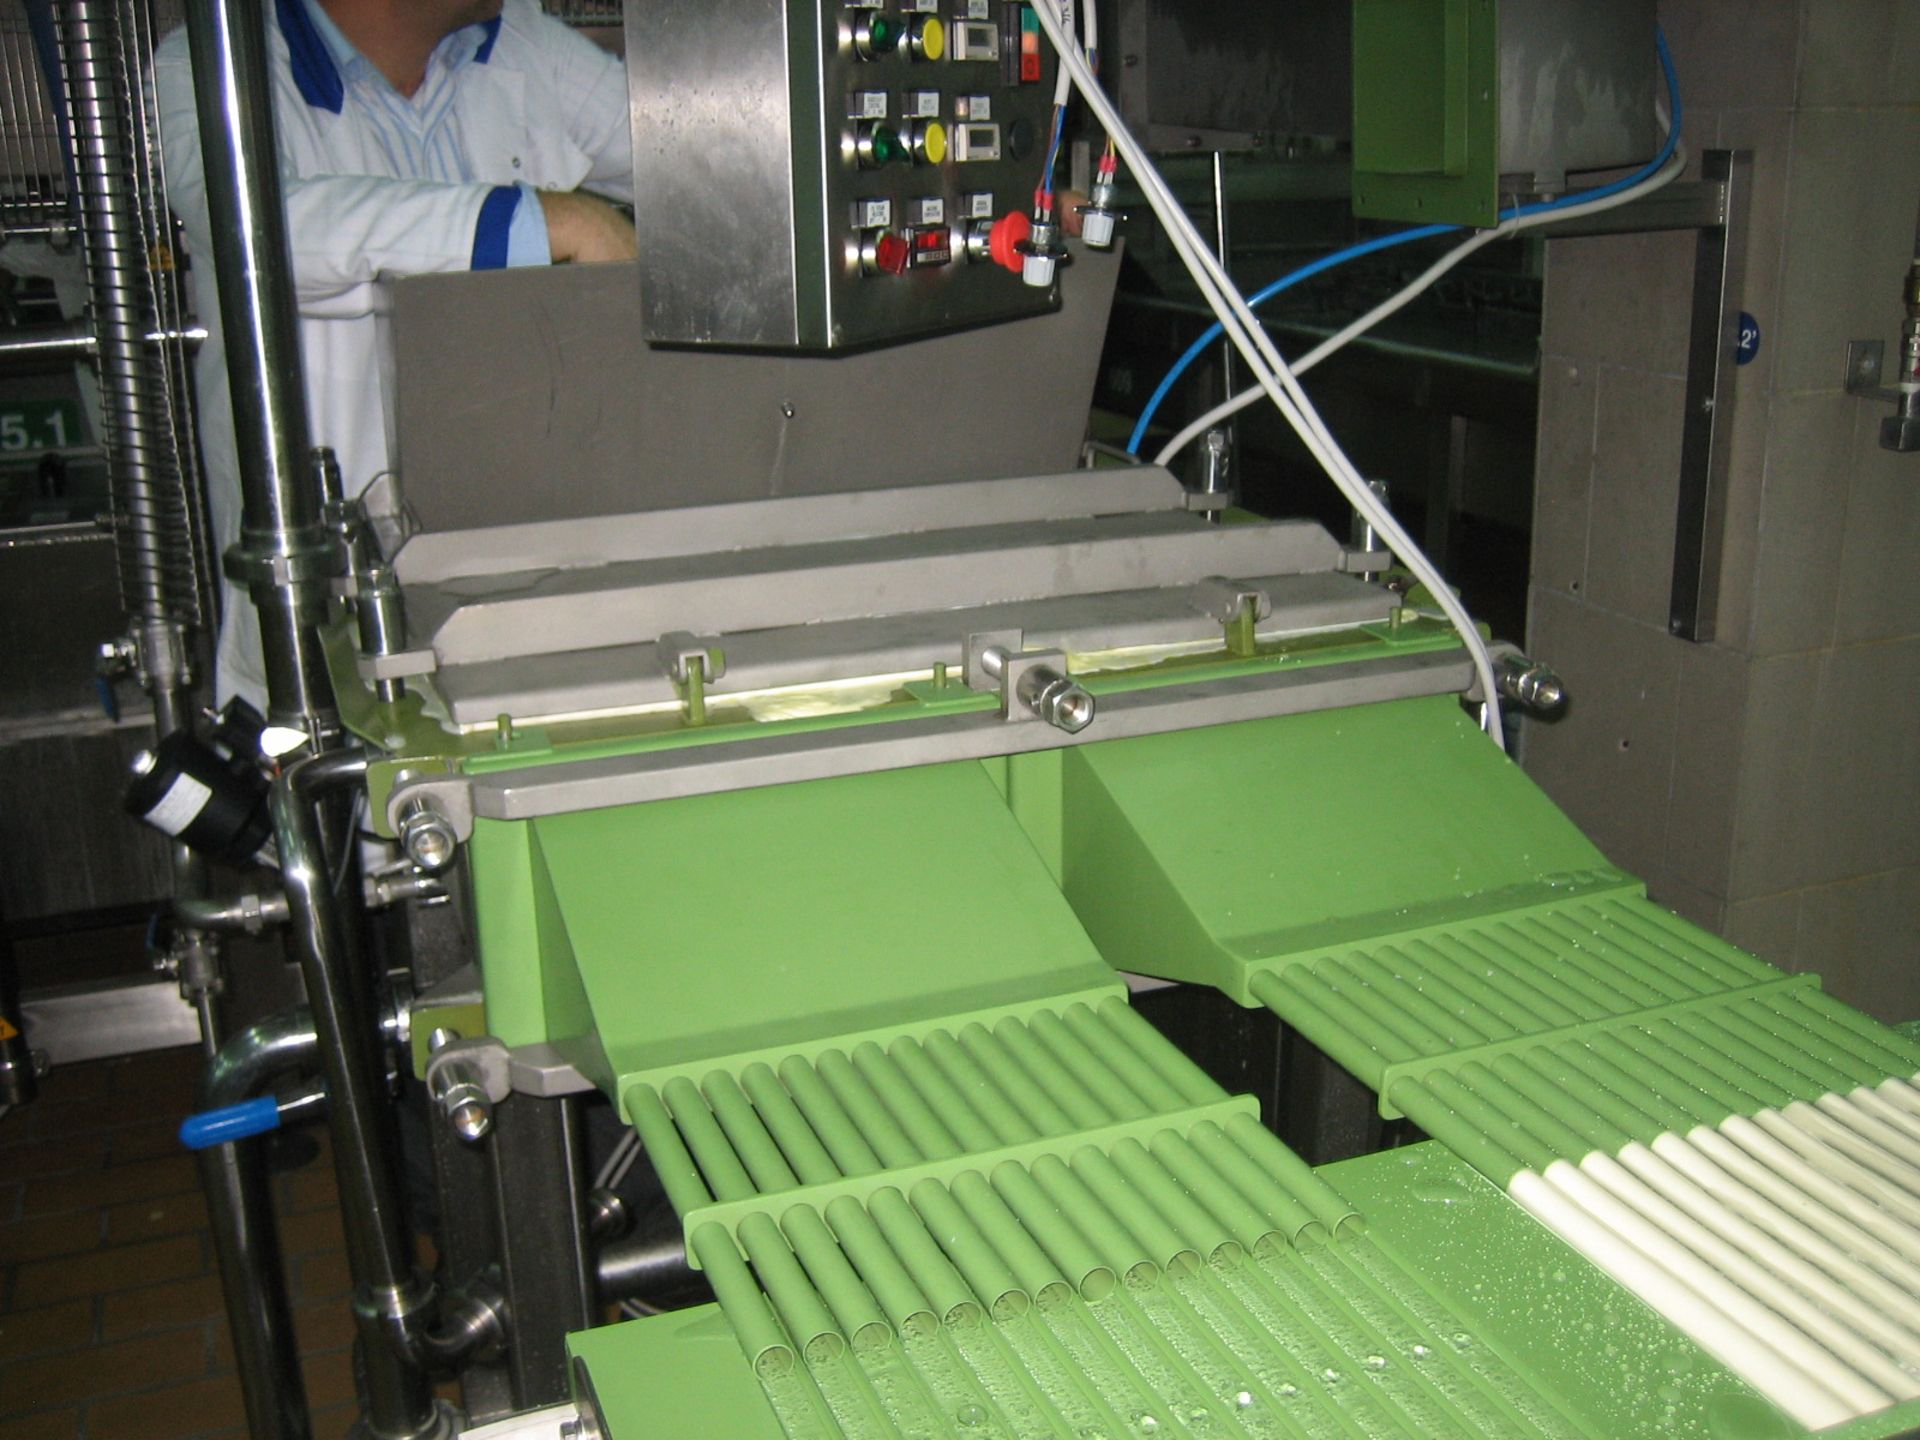 2X COMAT PROCESSING LINES FOR MOZZARELLA CHEESE TO PRODUCE MOZZARELLA STICKS AND MOZZARELLA BLOCKS. - Image 9 of 11